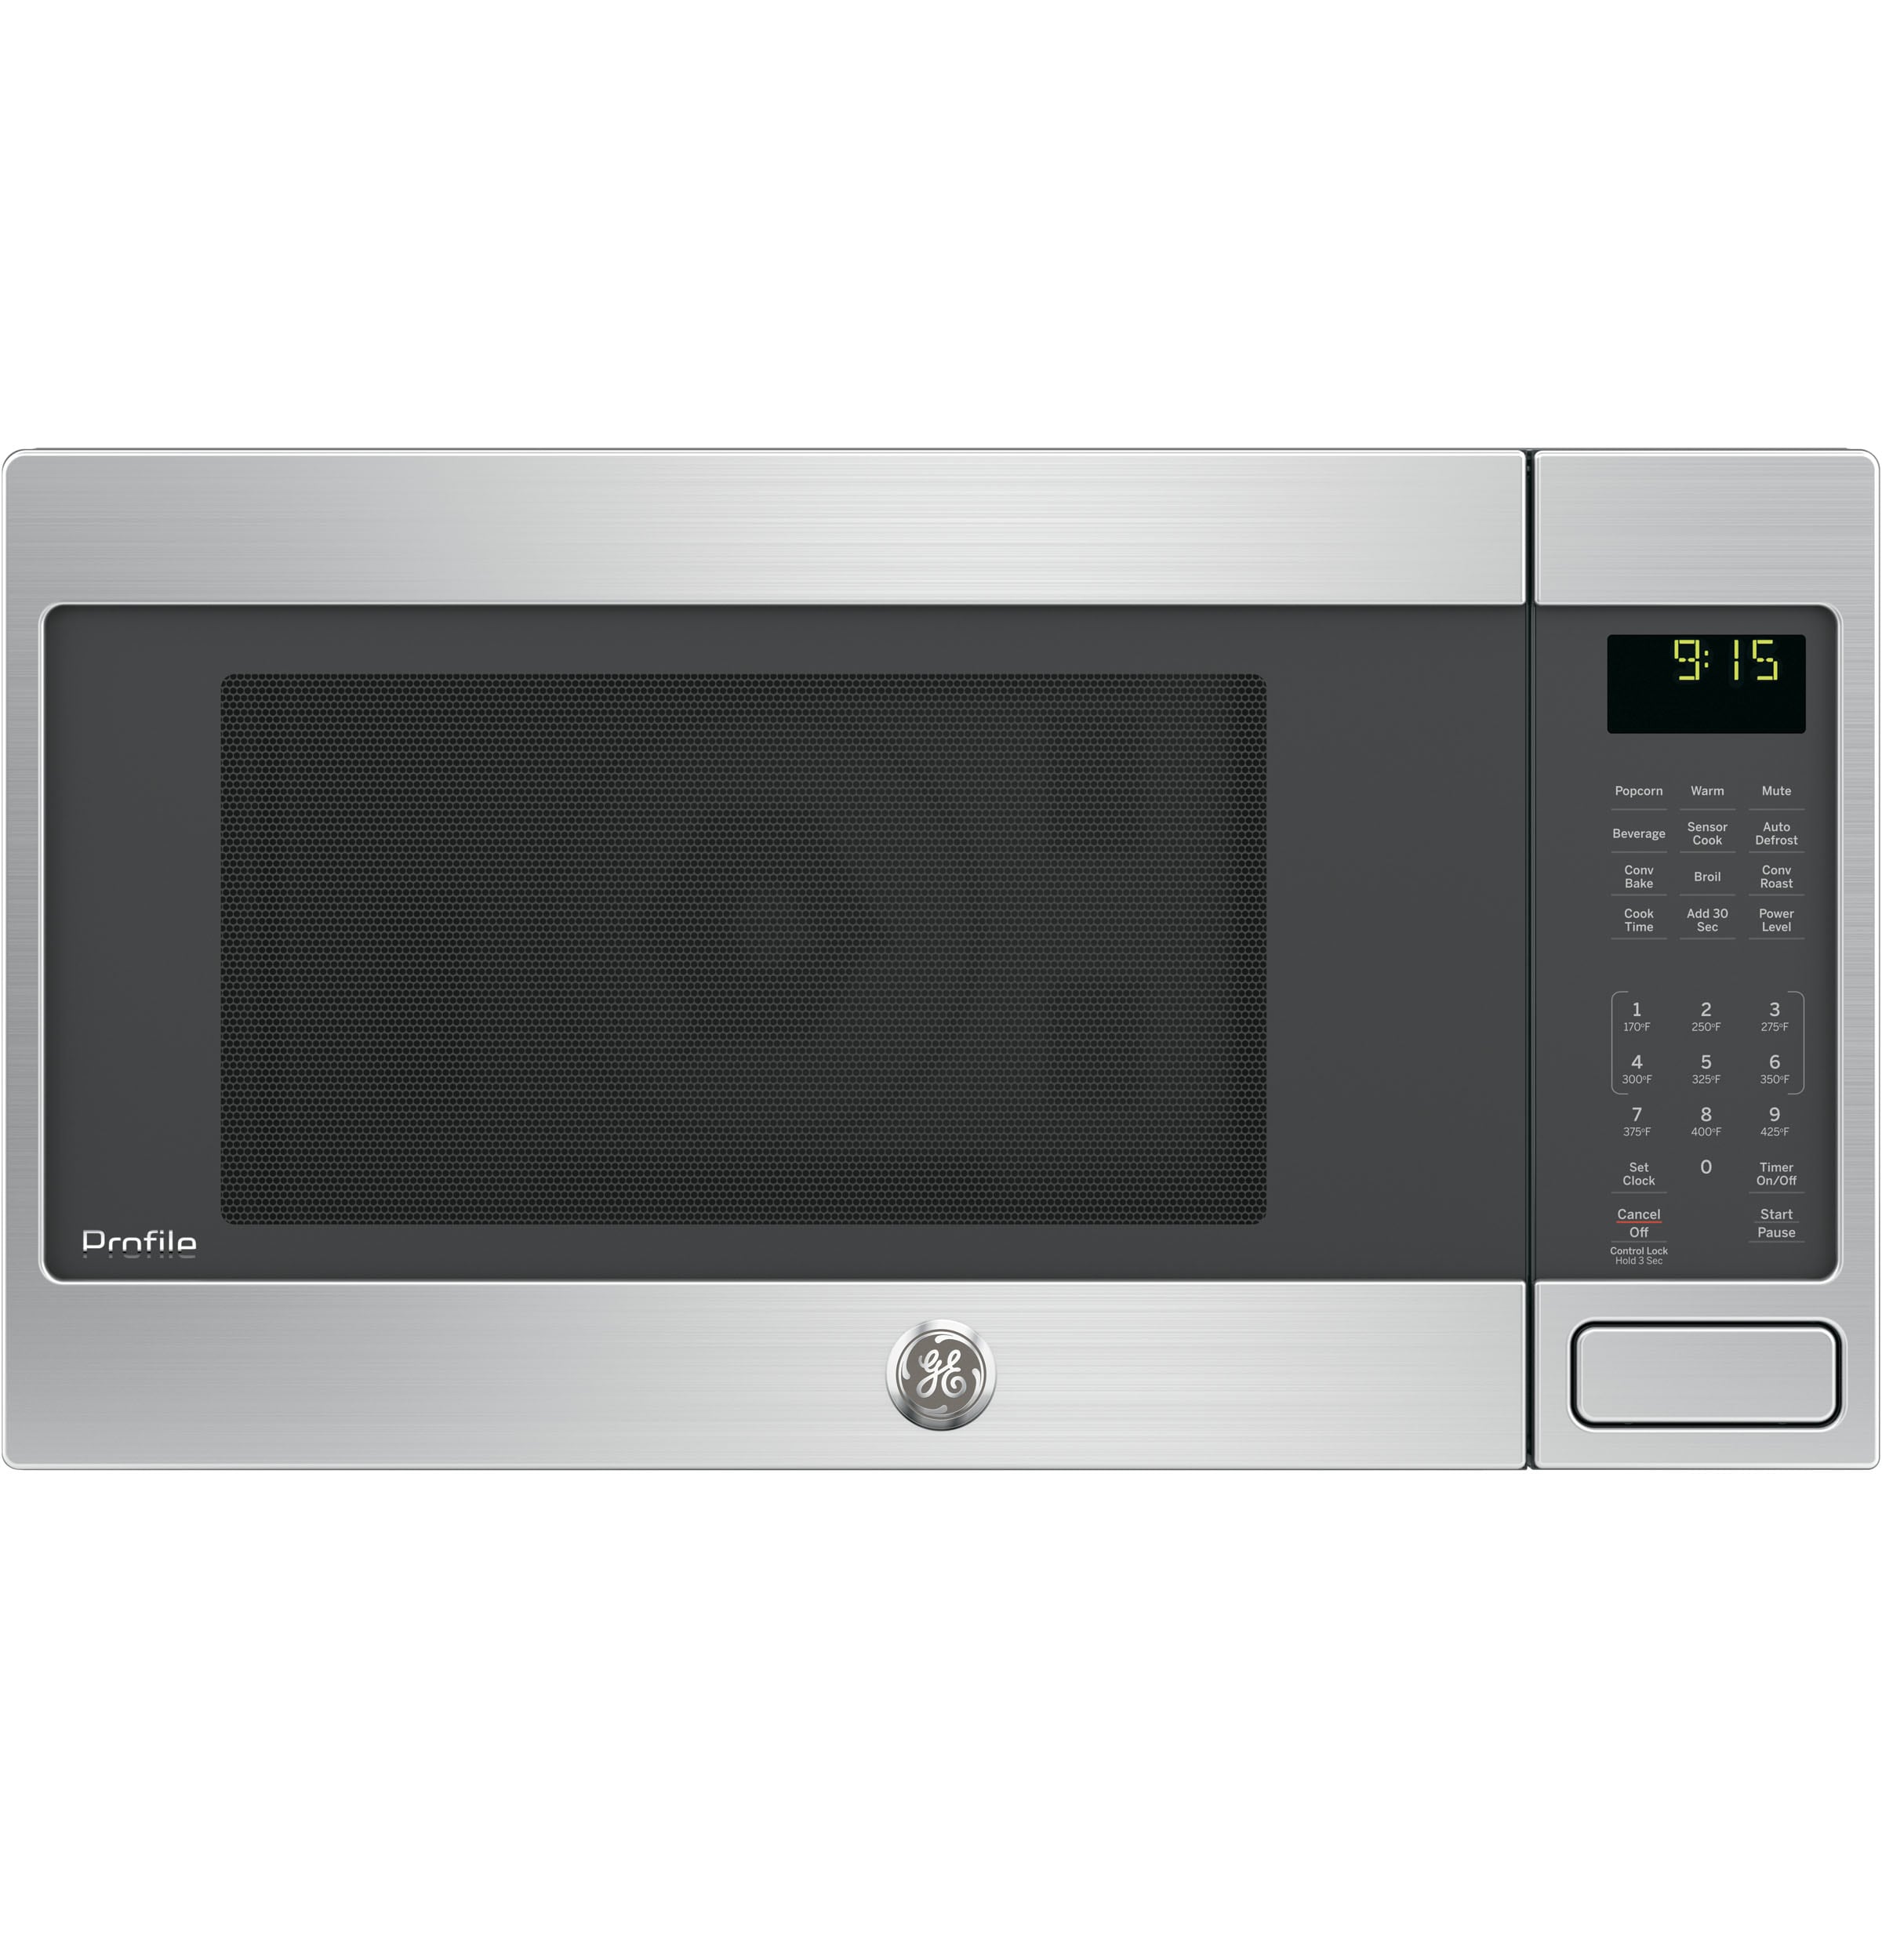 GE Smart Countertop Microwave Oven with Scan-to-Cook Technology